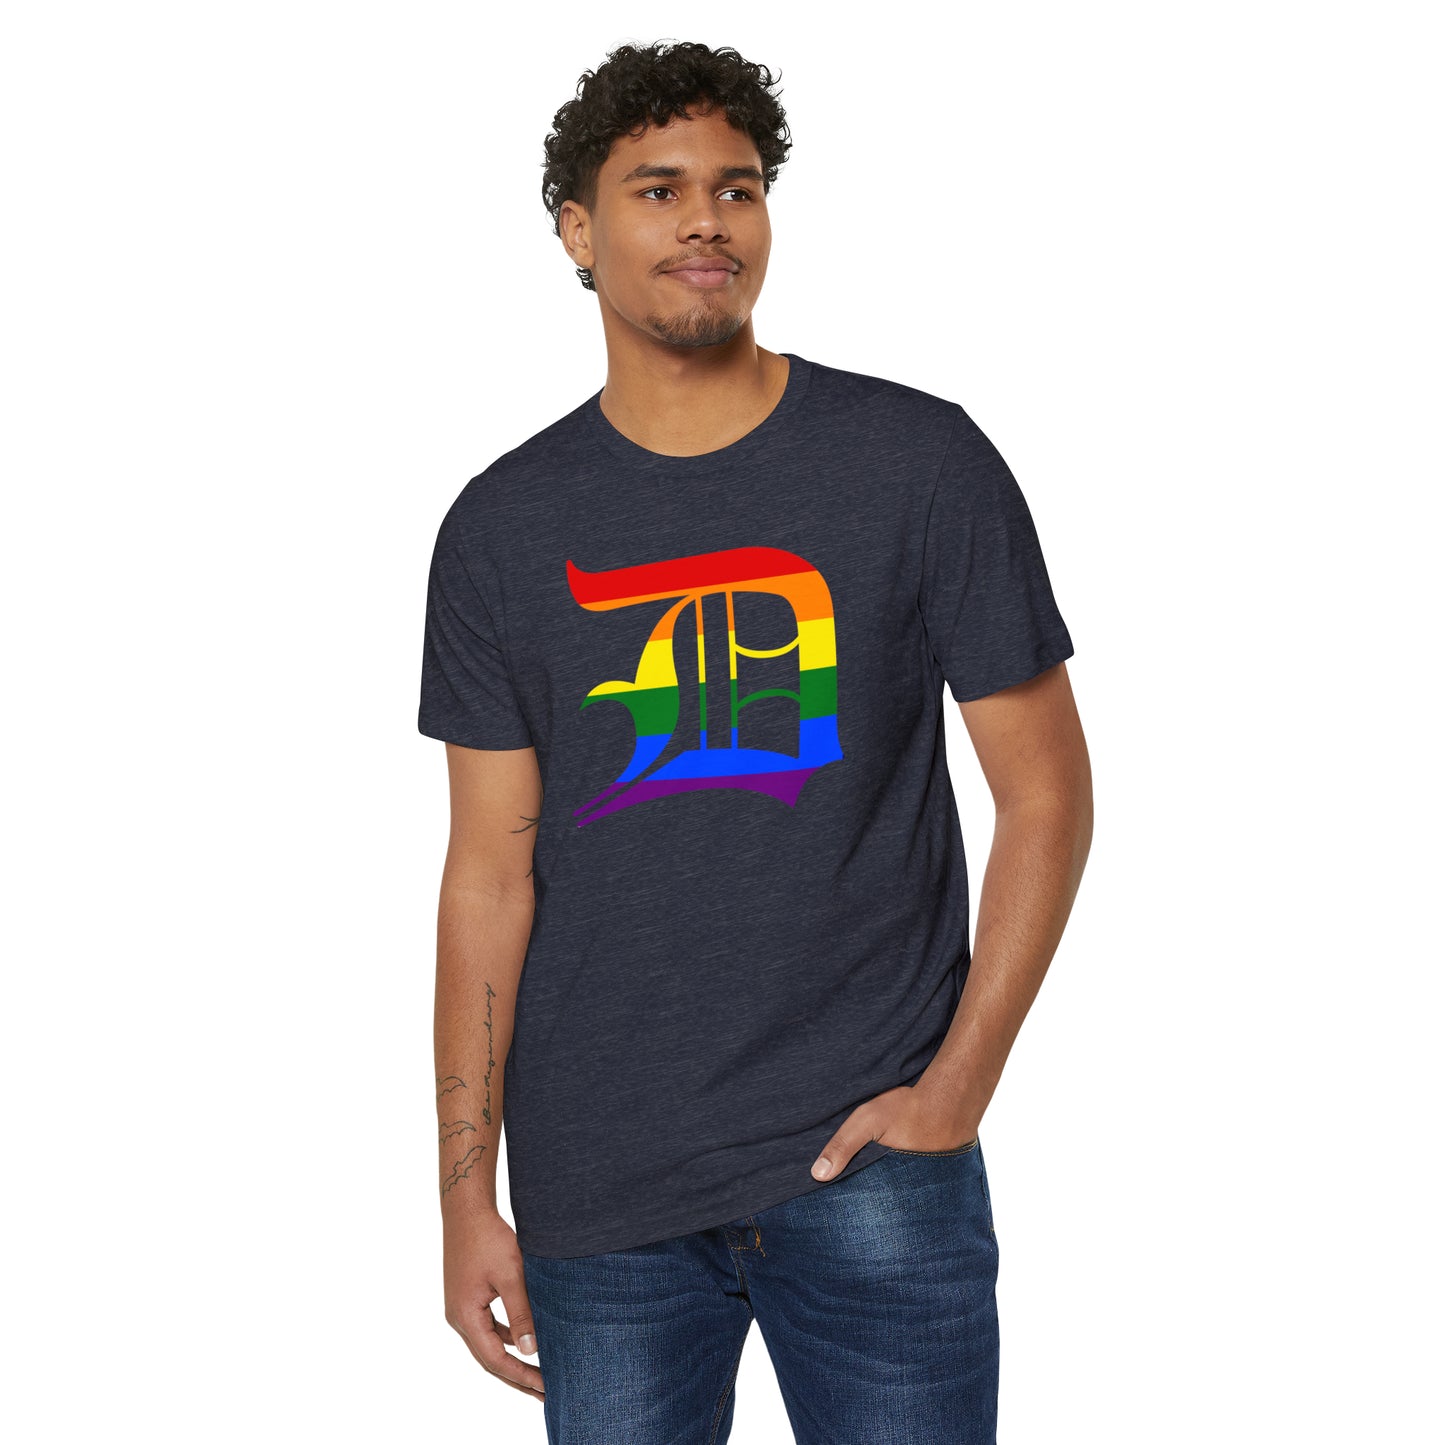 Detroit 'Old English D' T-Shirt (Rainbow Pride Edition) | Unisex Recycled Organic